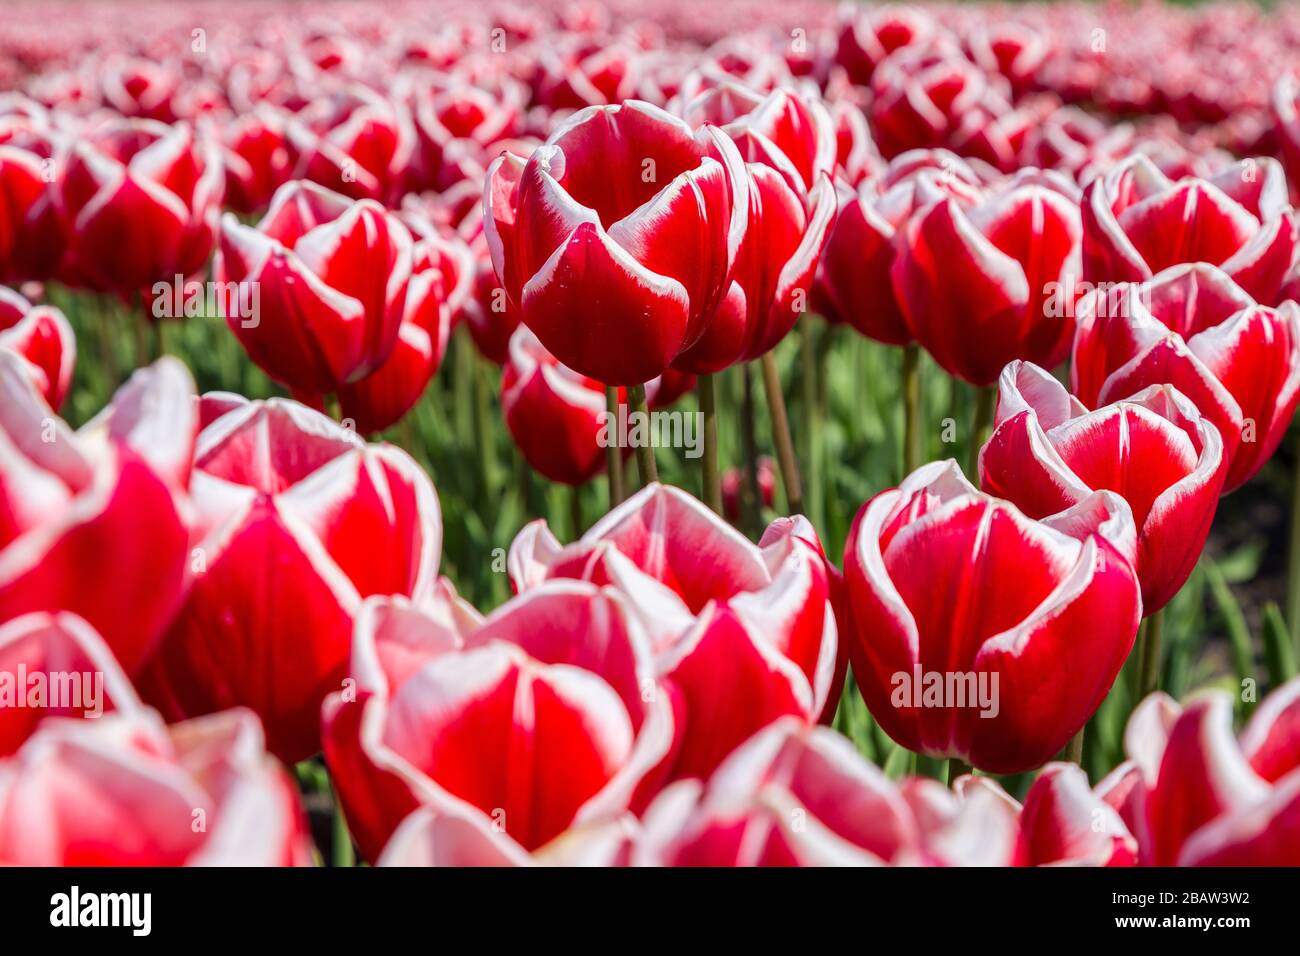 Multicolored tulips surrounded by green meadows. Berkmeer, Koggenland, The Netherlands, North Holland, Europe. Stock Photo